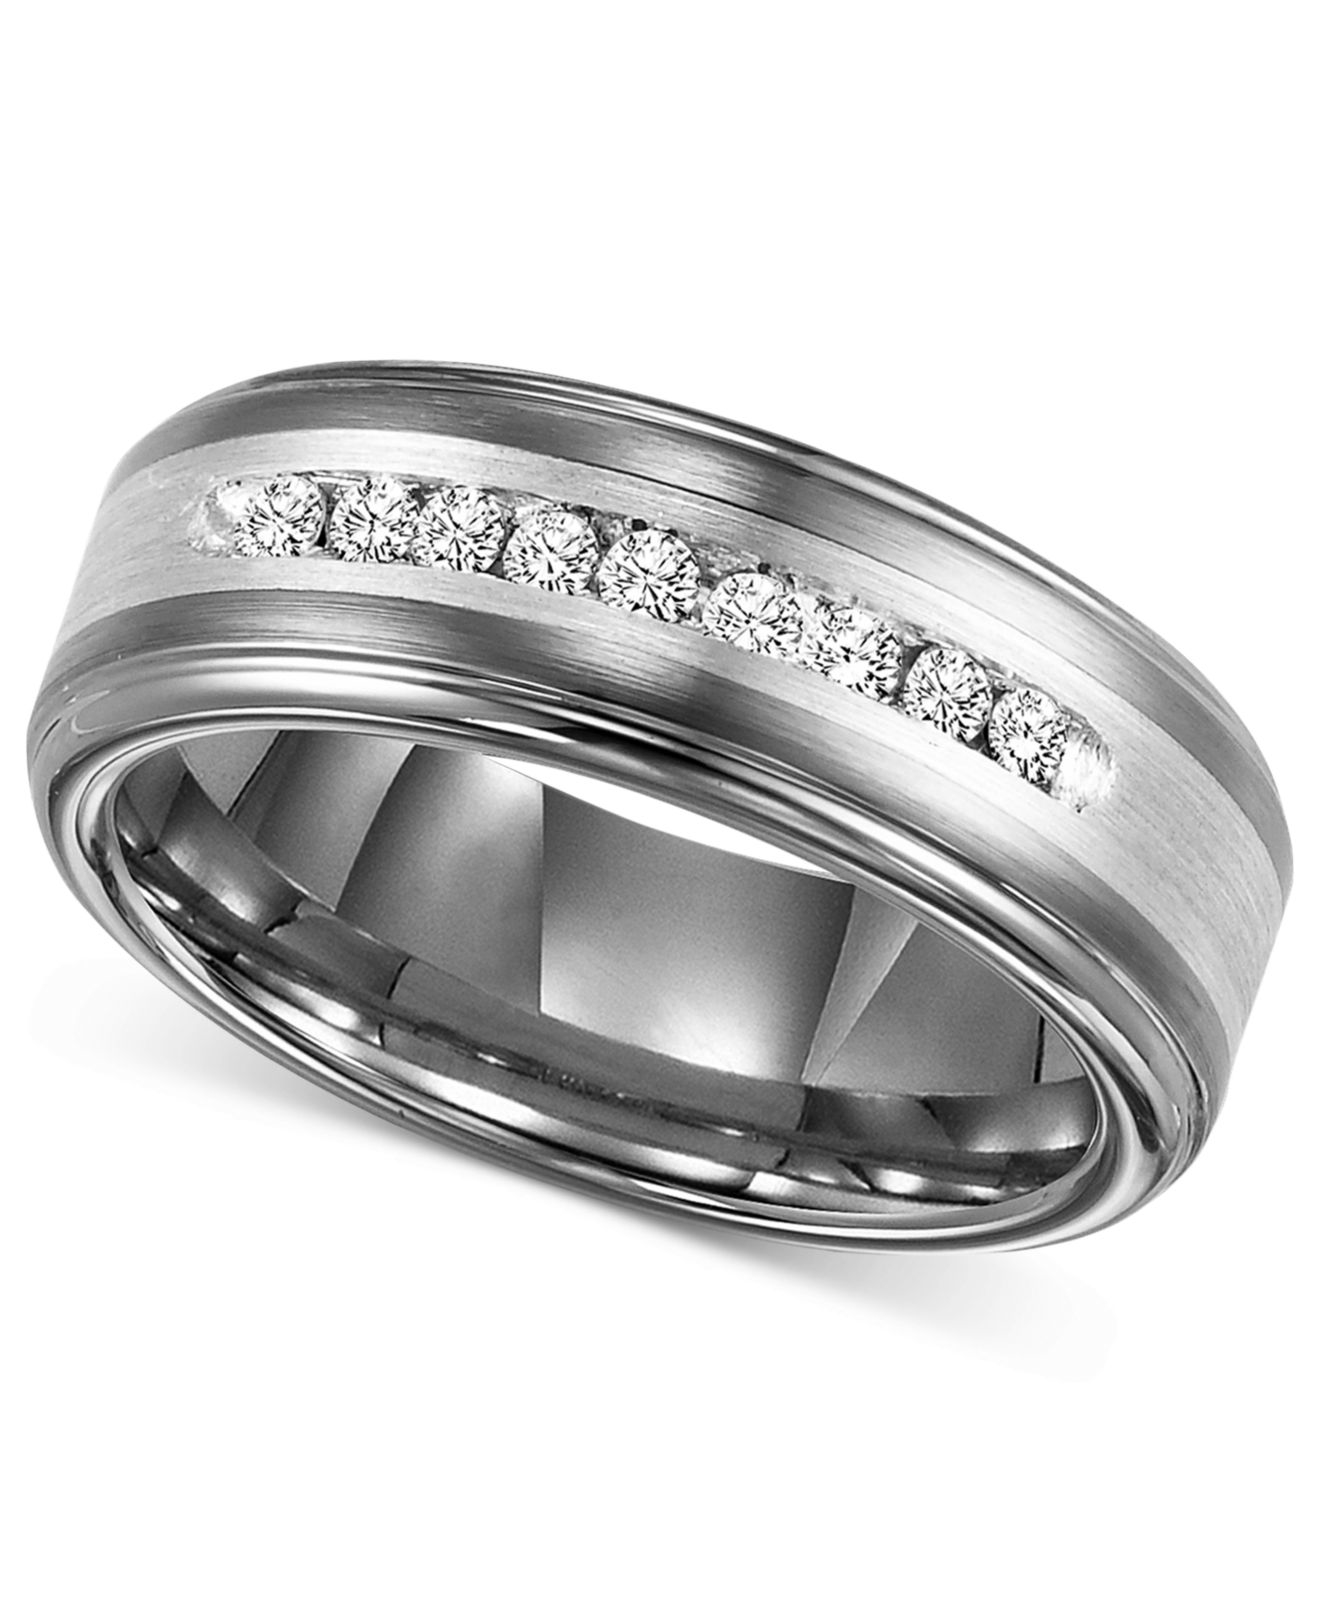 Triton Mens Tungsten Carbide And Diamond Wedding Band Ring In Sterling